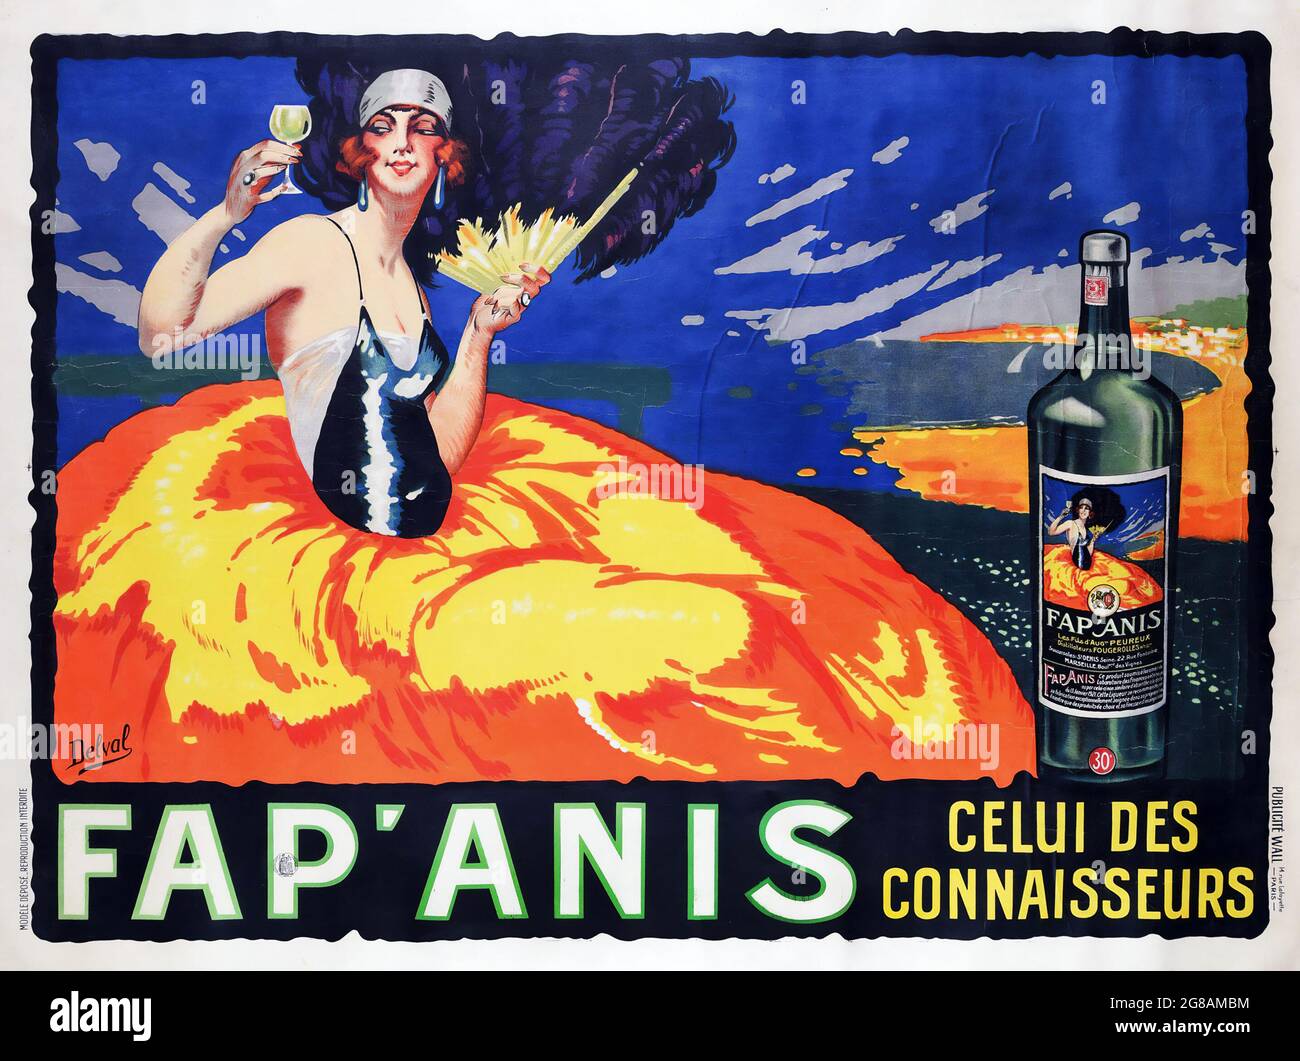 Fap'Anis Celui Des Connaisseurs. Vintage advertisement for alcohol. Old times advertising. Food and drink Poster. 1920. Stock Photo